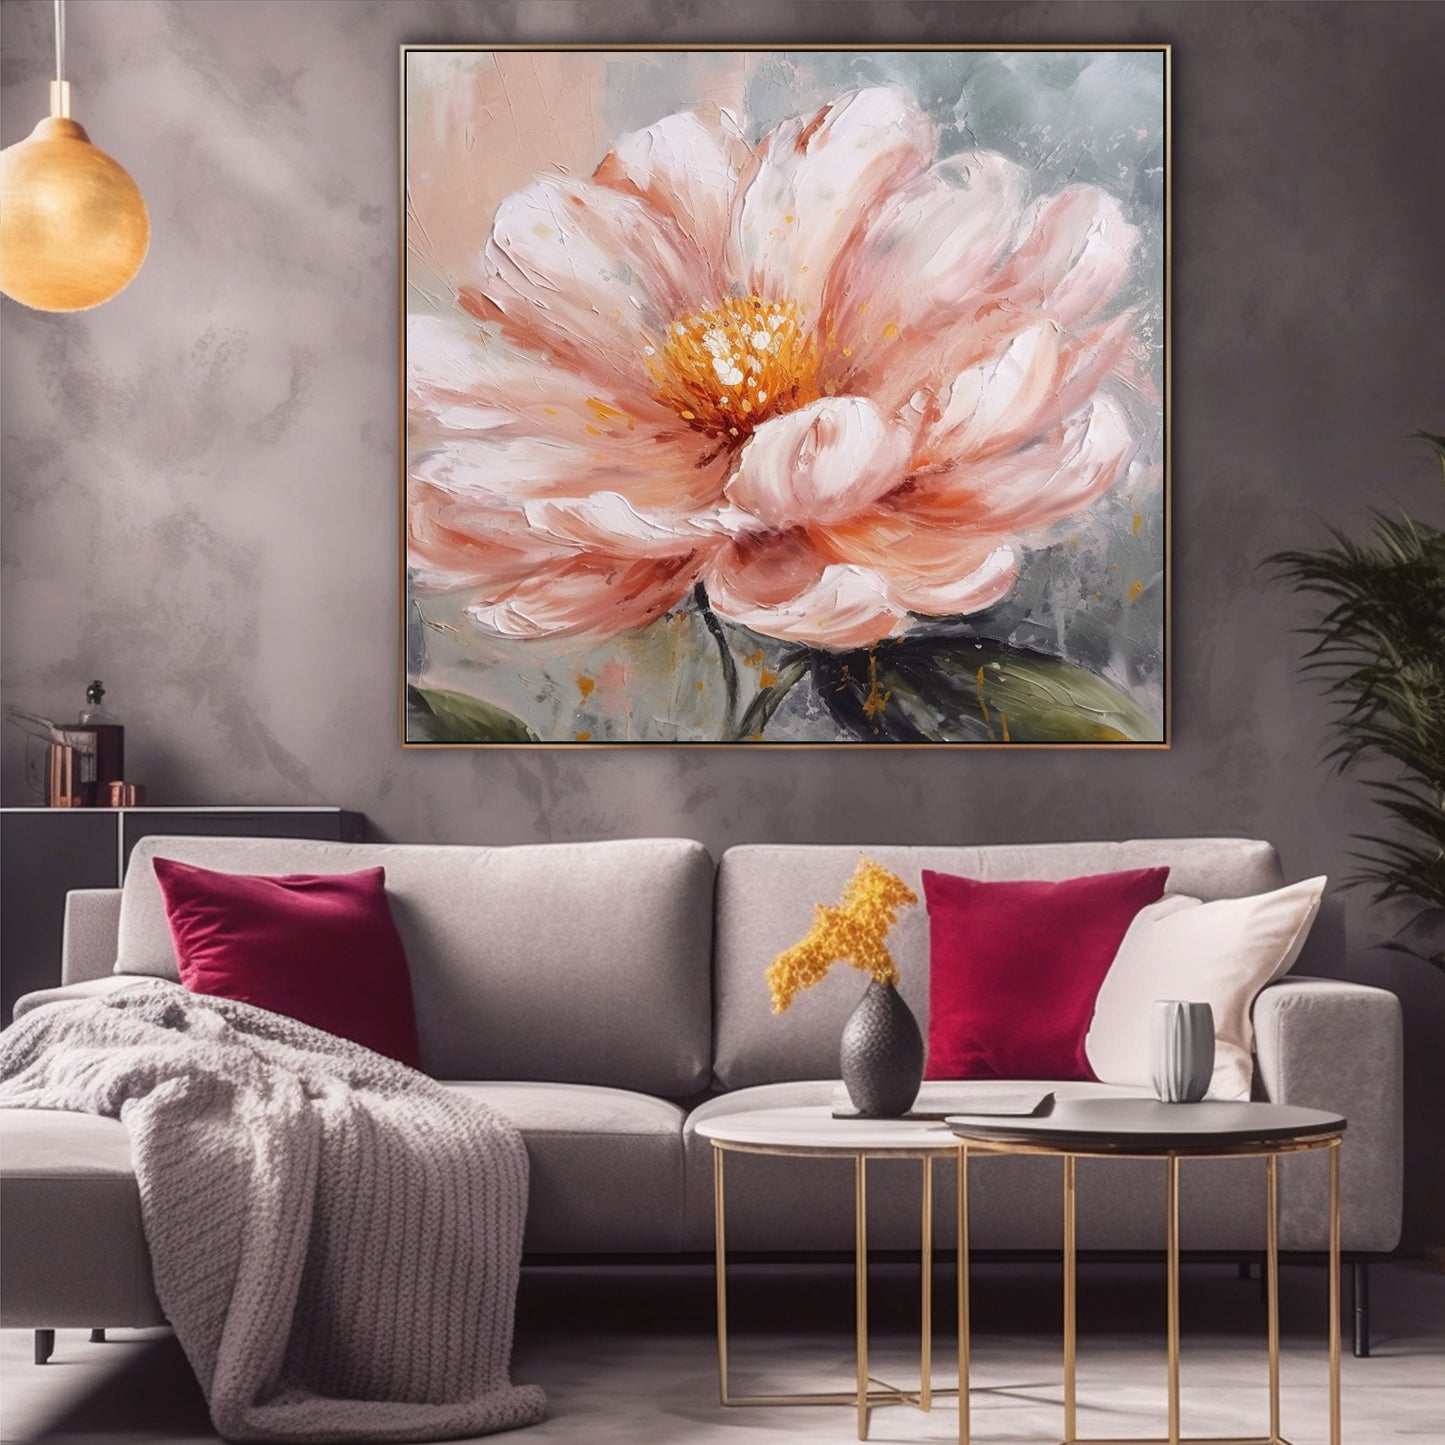 Abstract 3D Flower Oil Painting Texture Floral Wall Art Minimalist Living Room Decor Gift F0416A2329